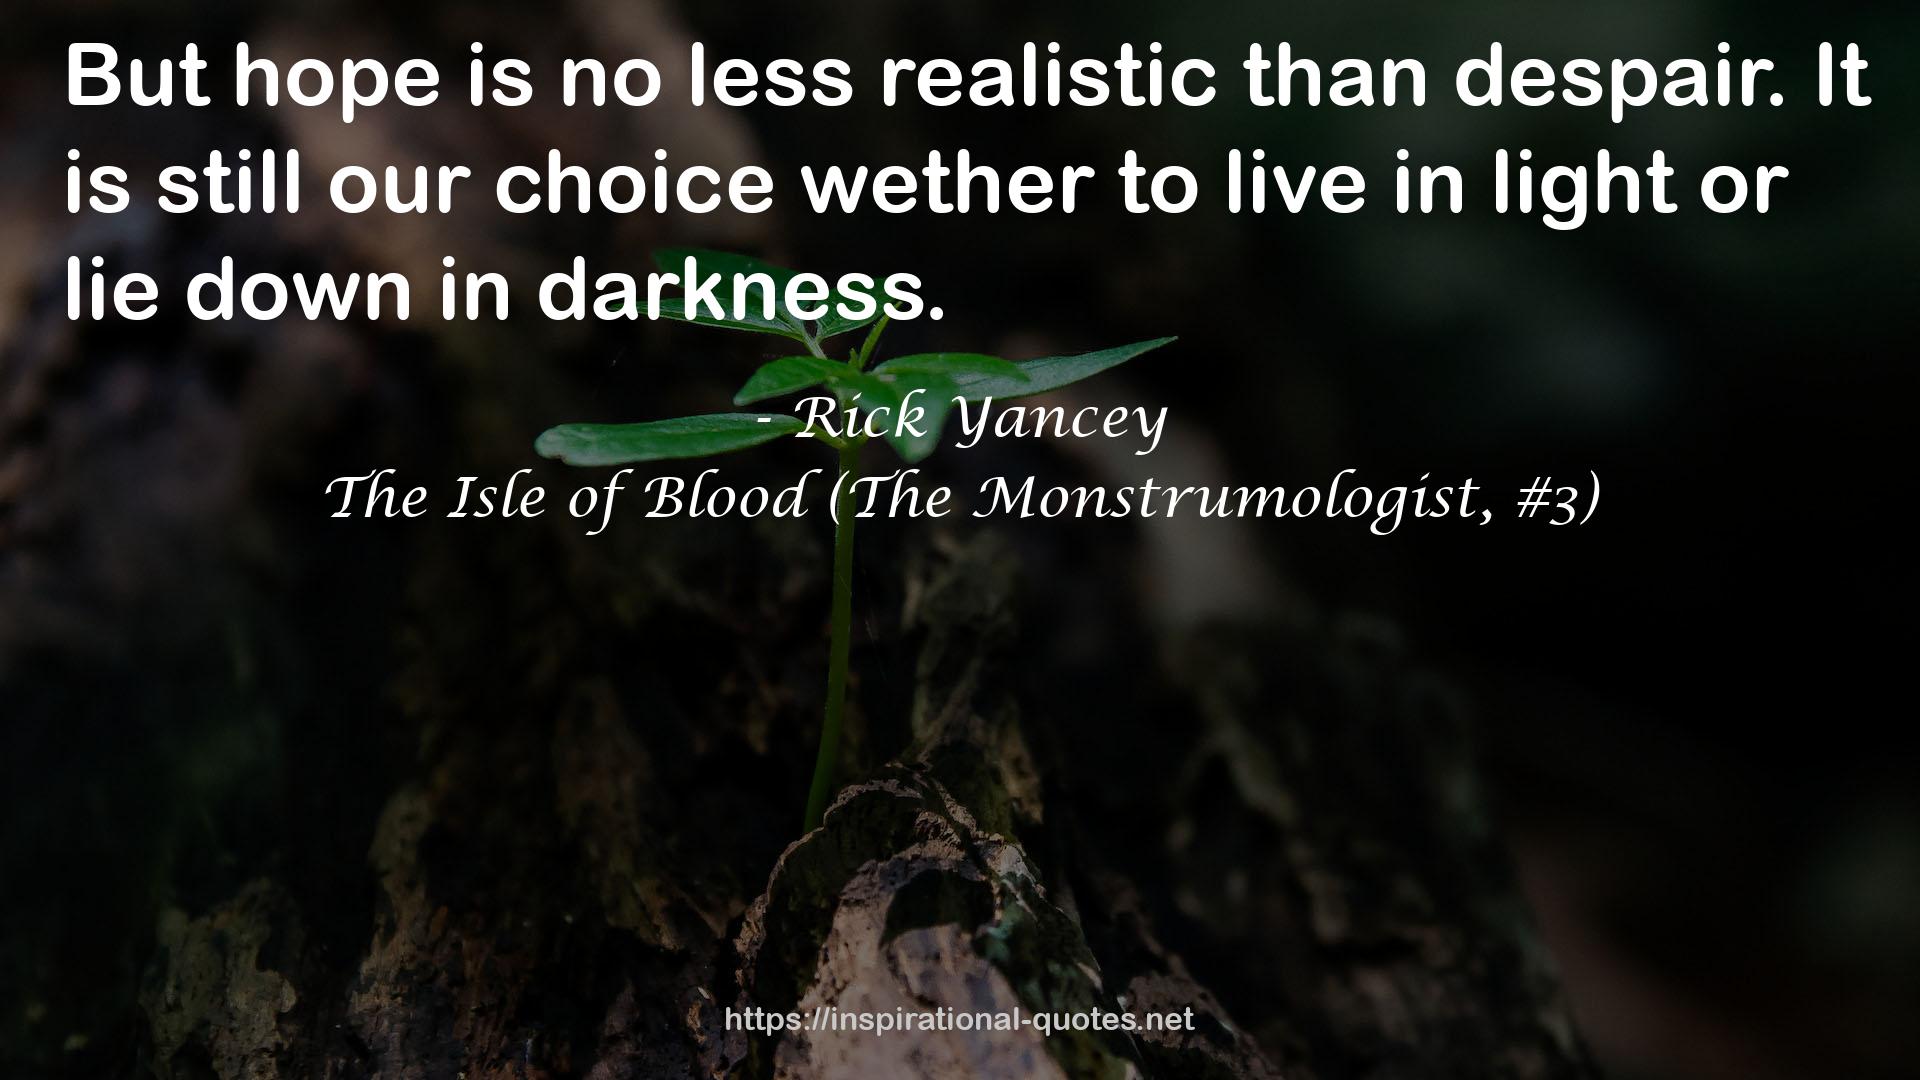 The Isle of Blood (The Monstrumologist, #3) QUOTES